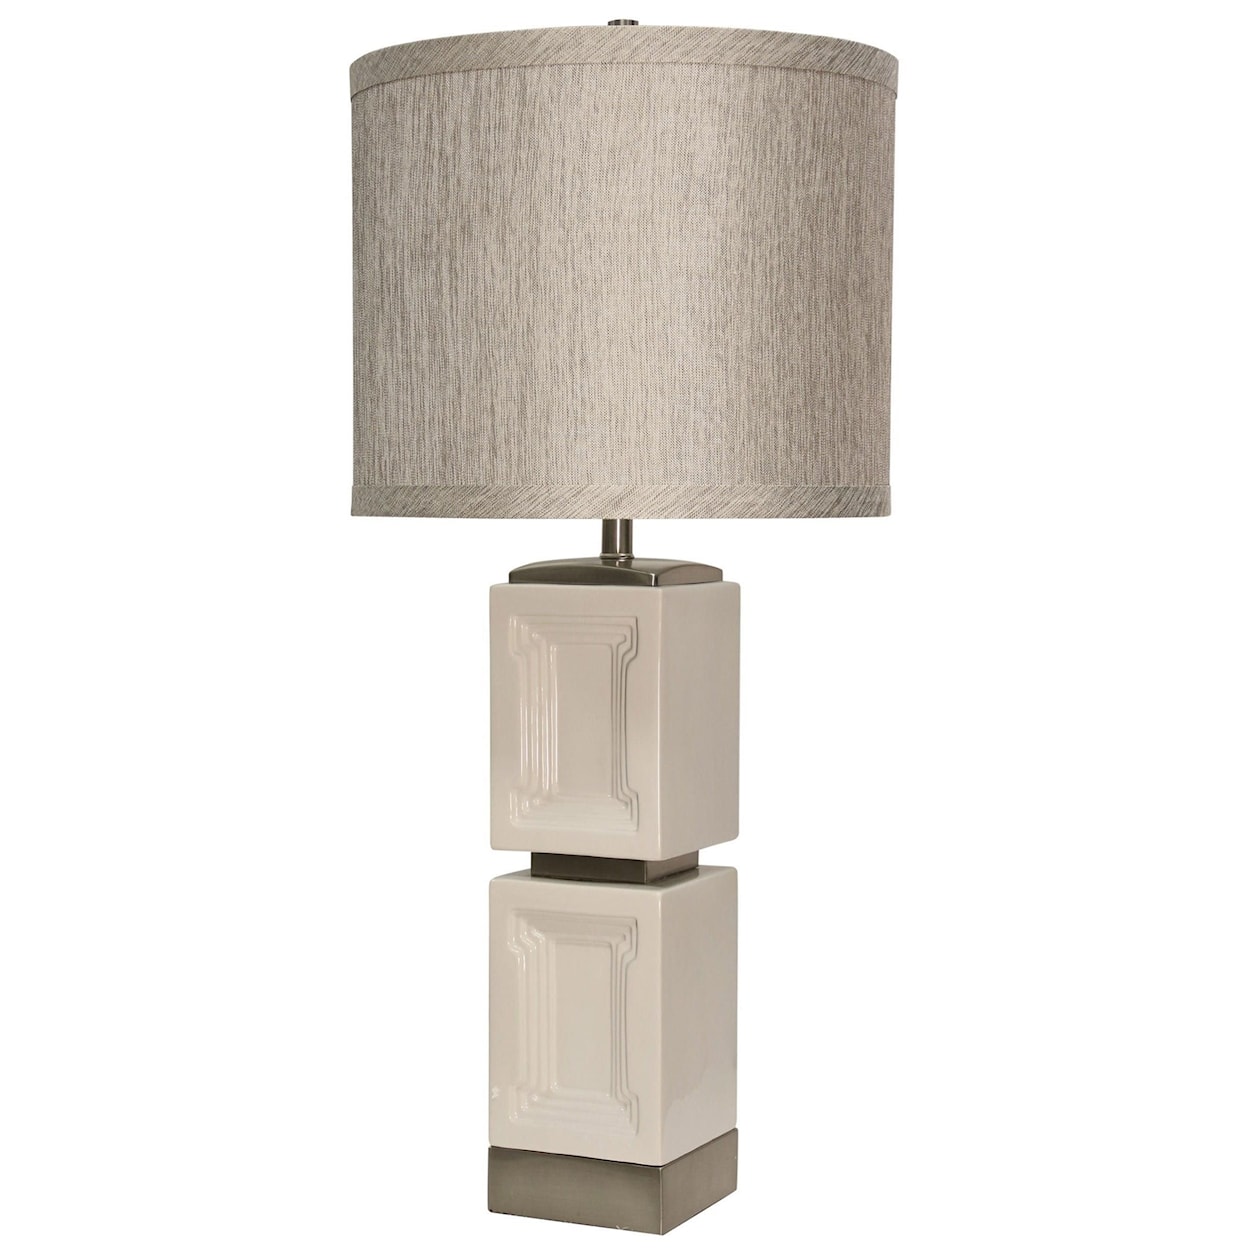 StyleCraft Lamps Ceramic & Metal Accent Table Lamp